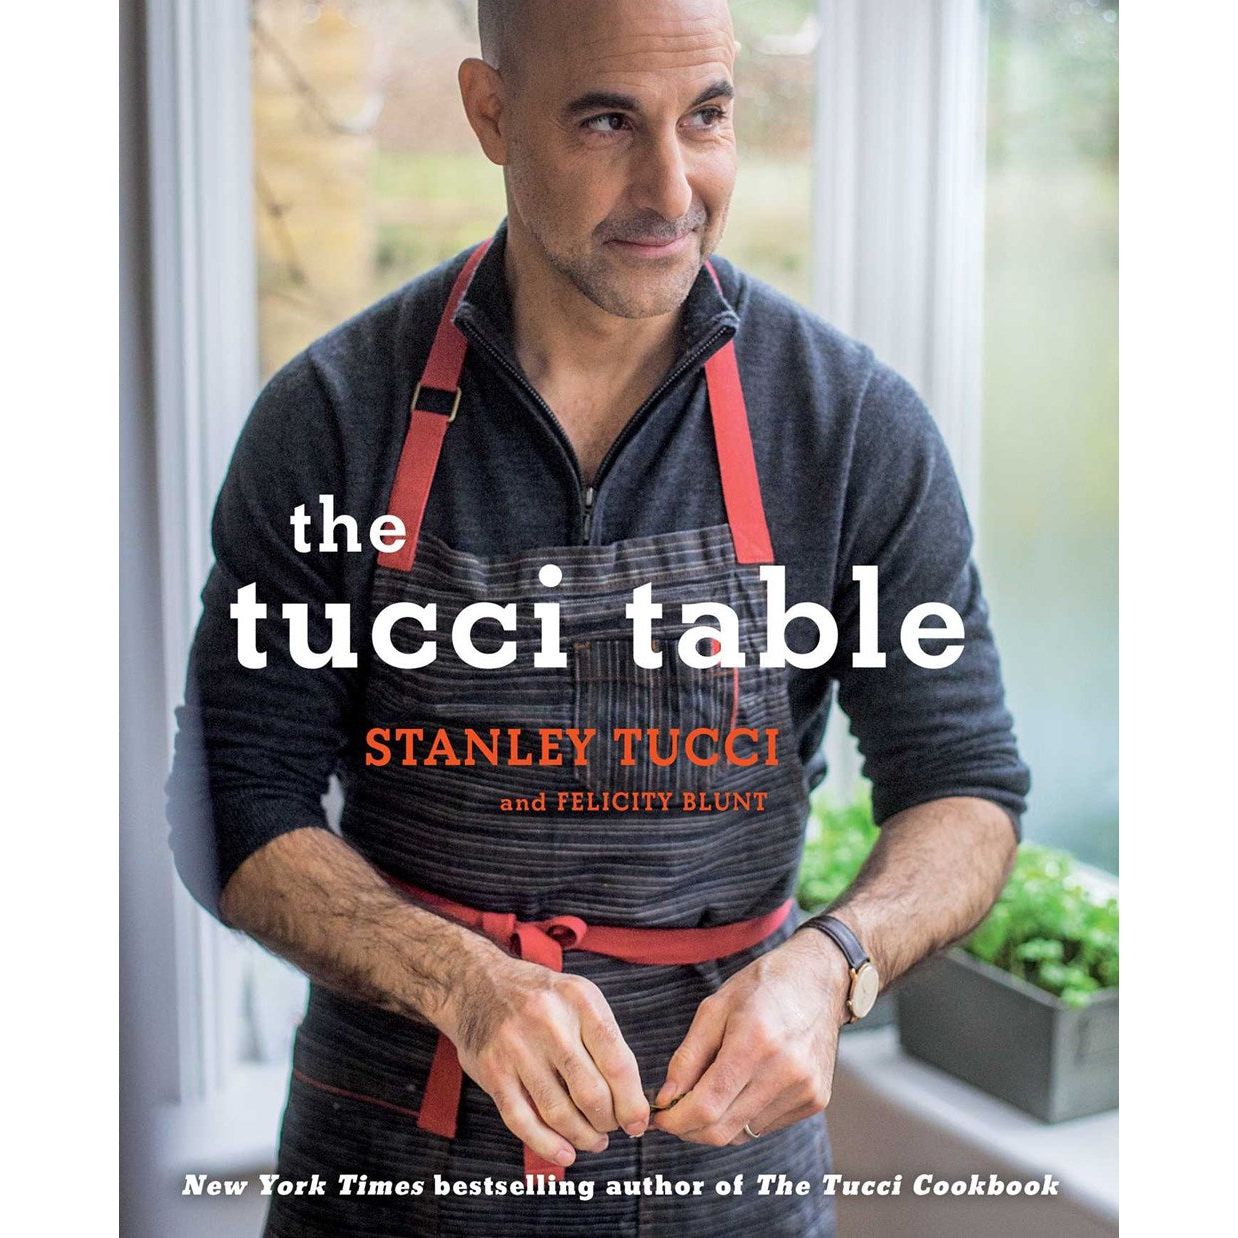 The Tucci Table (Stanley Tucci)